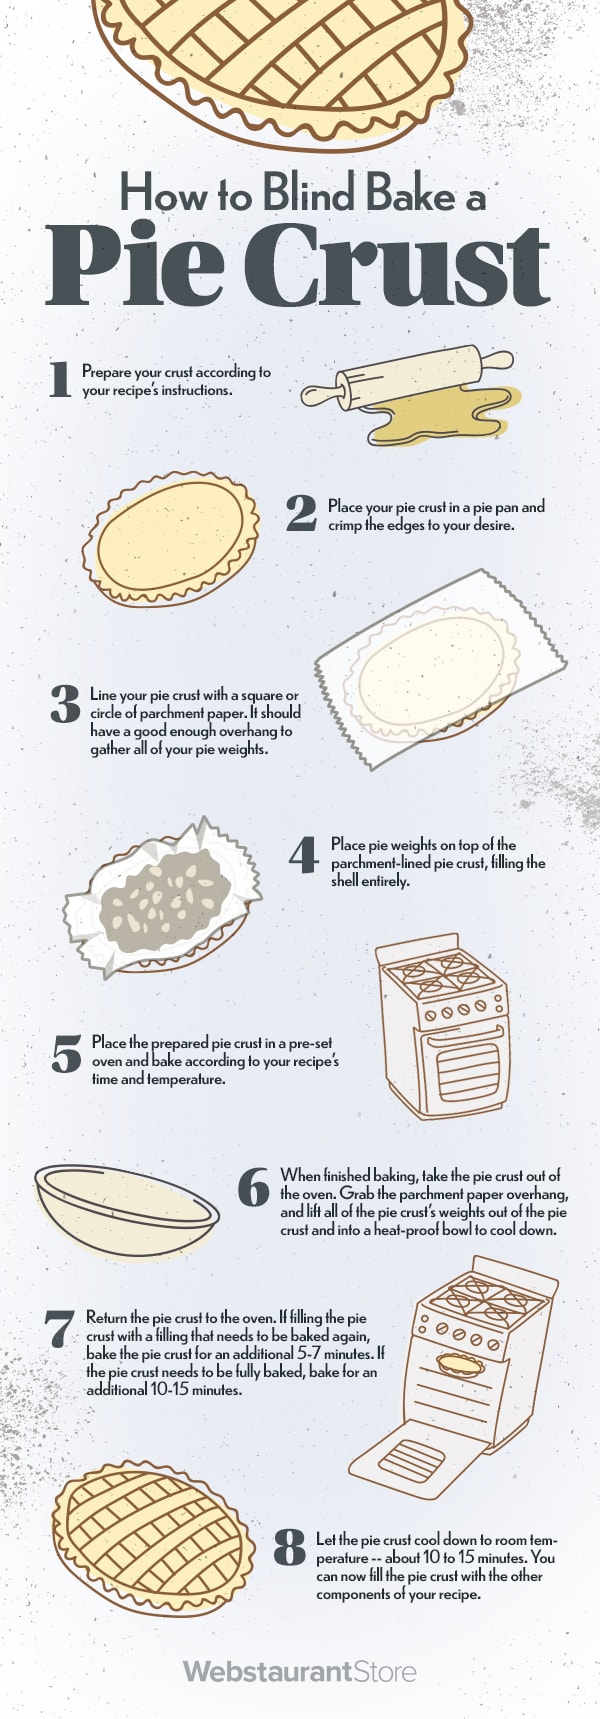 How to Blind Bake a Pie Crust Infographic